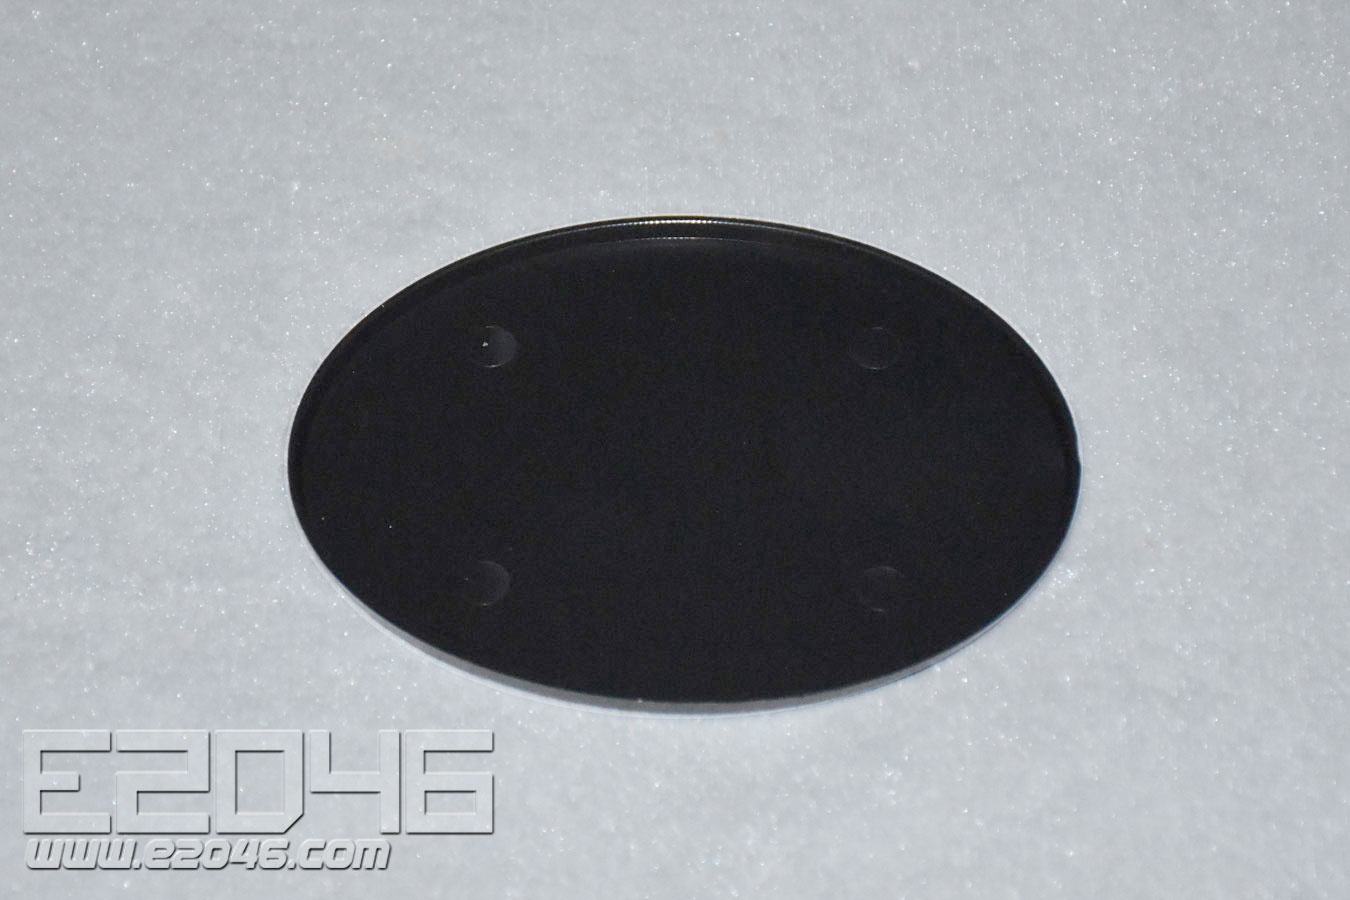 L12 Black Frosted Oval Display Base